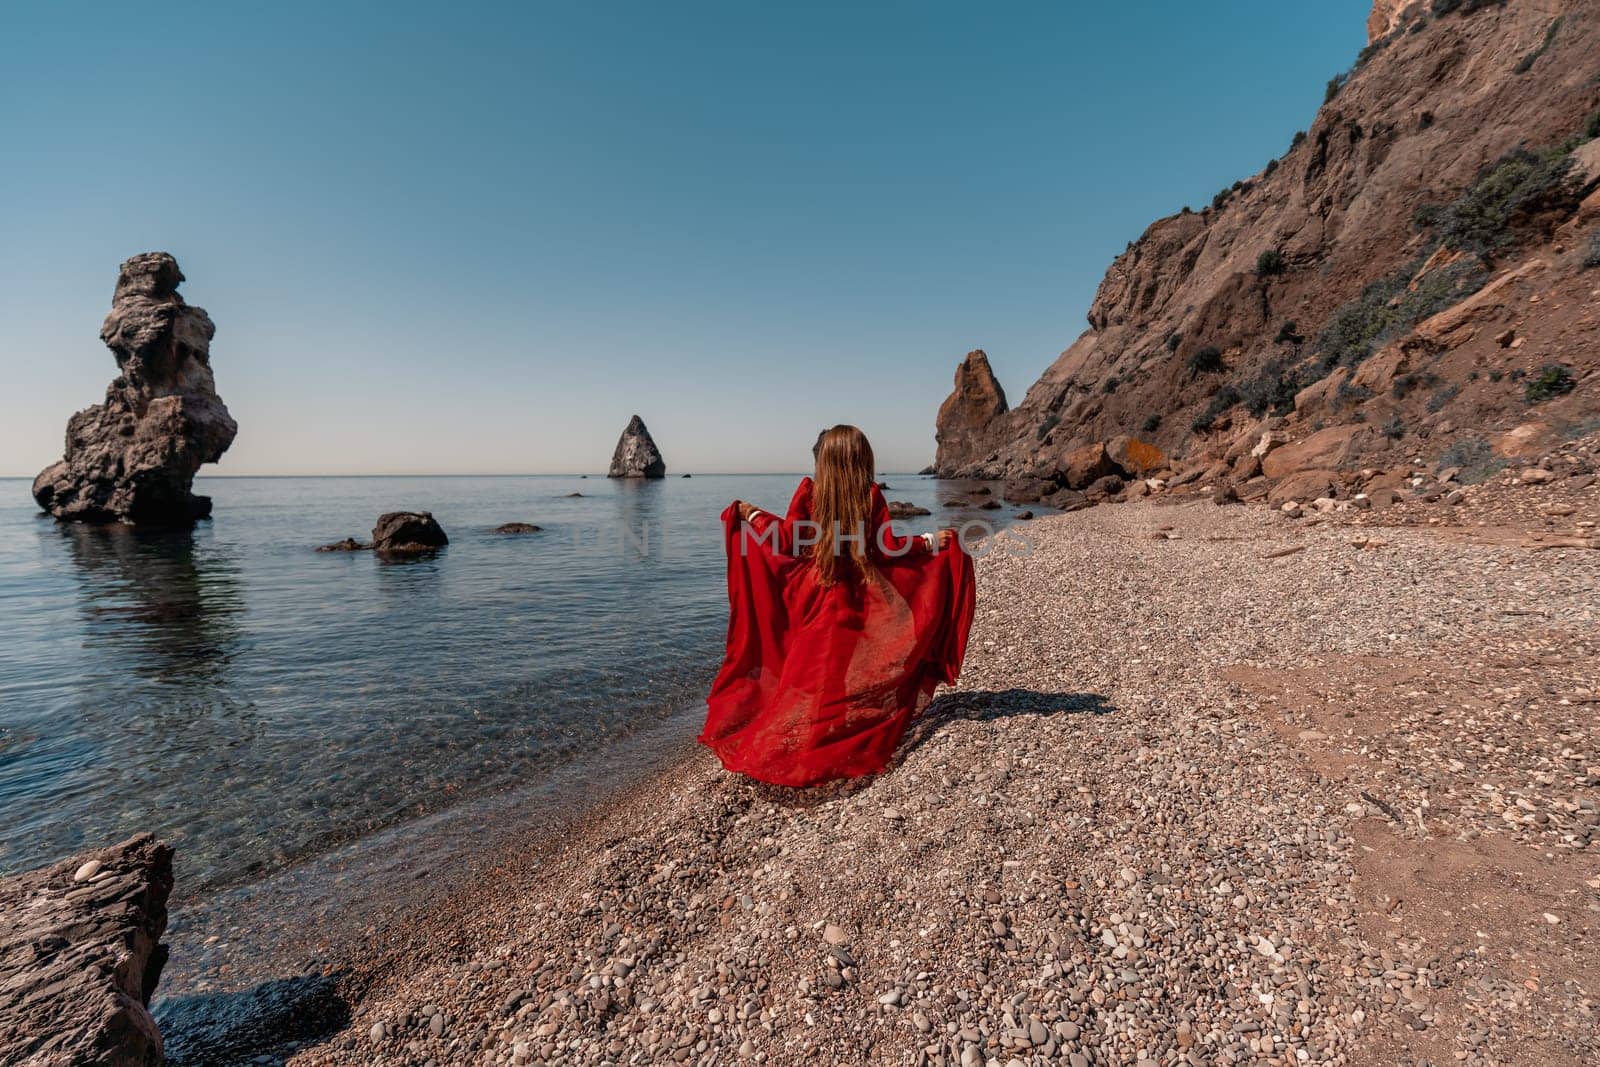 A woman in a red dress stands on a beach with a rocky shoreline in the background. The scene is serene and peaceful, with the woman's red dress contrasting against the natural elements of the beach. by Matiunina